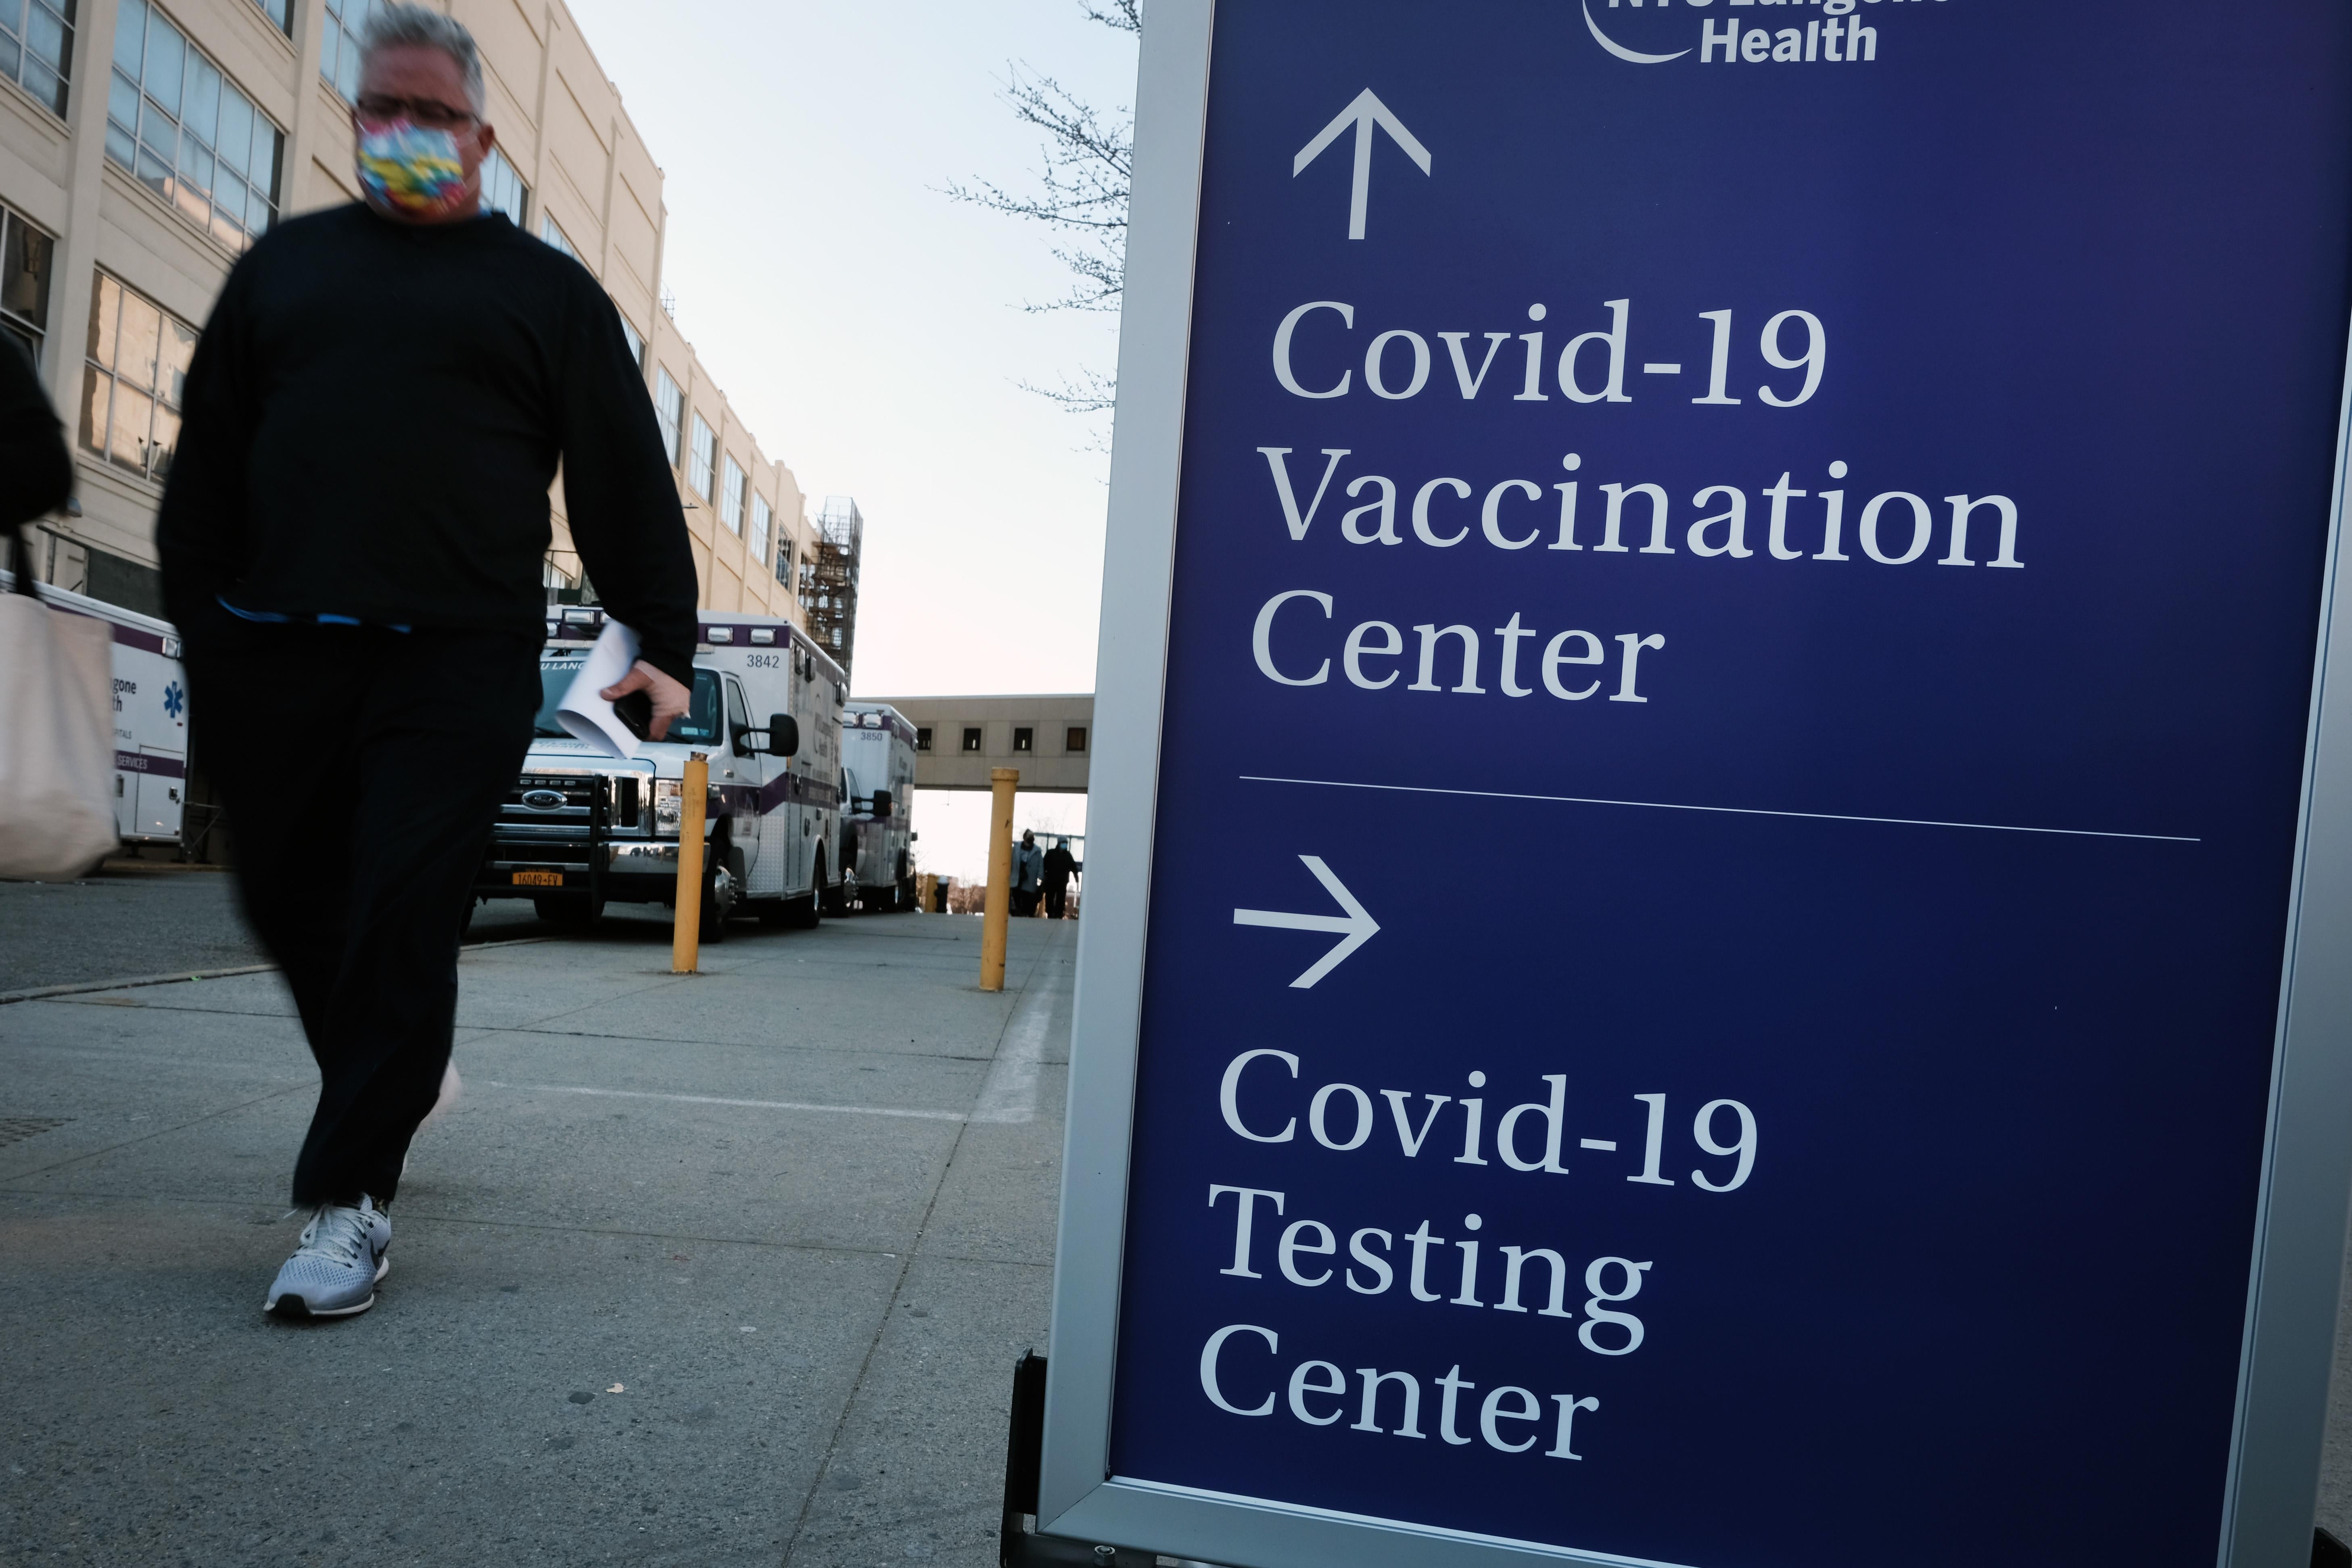 People walk by a sign pointing toward a COVID-19 testing center and a COVID-19 vaccination center at a Brooklyn hospital.